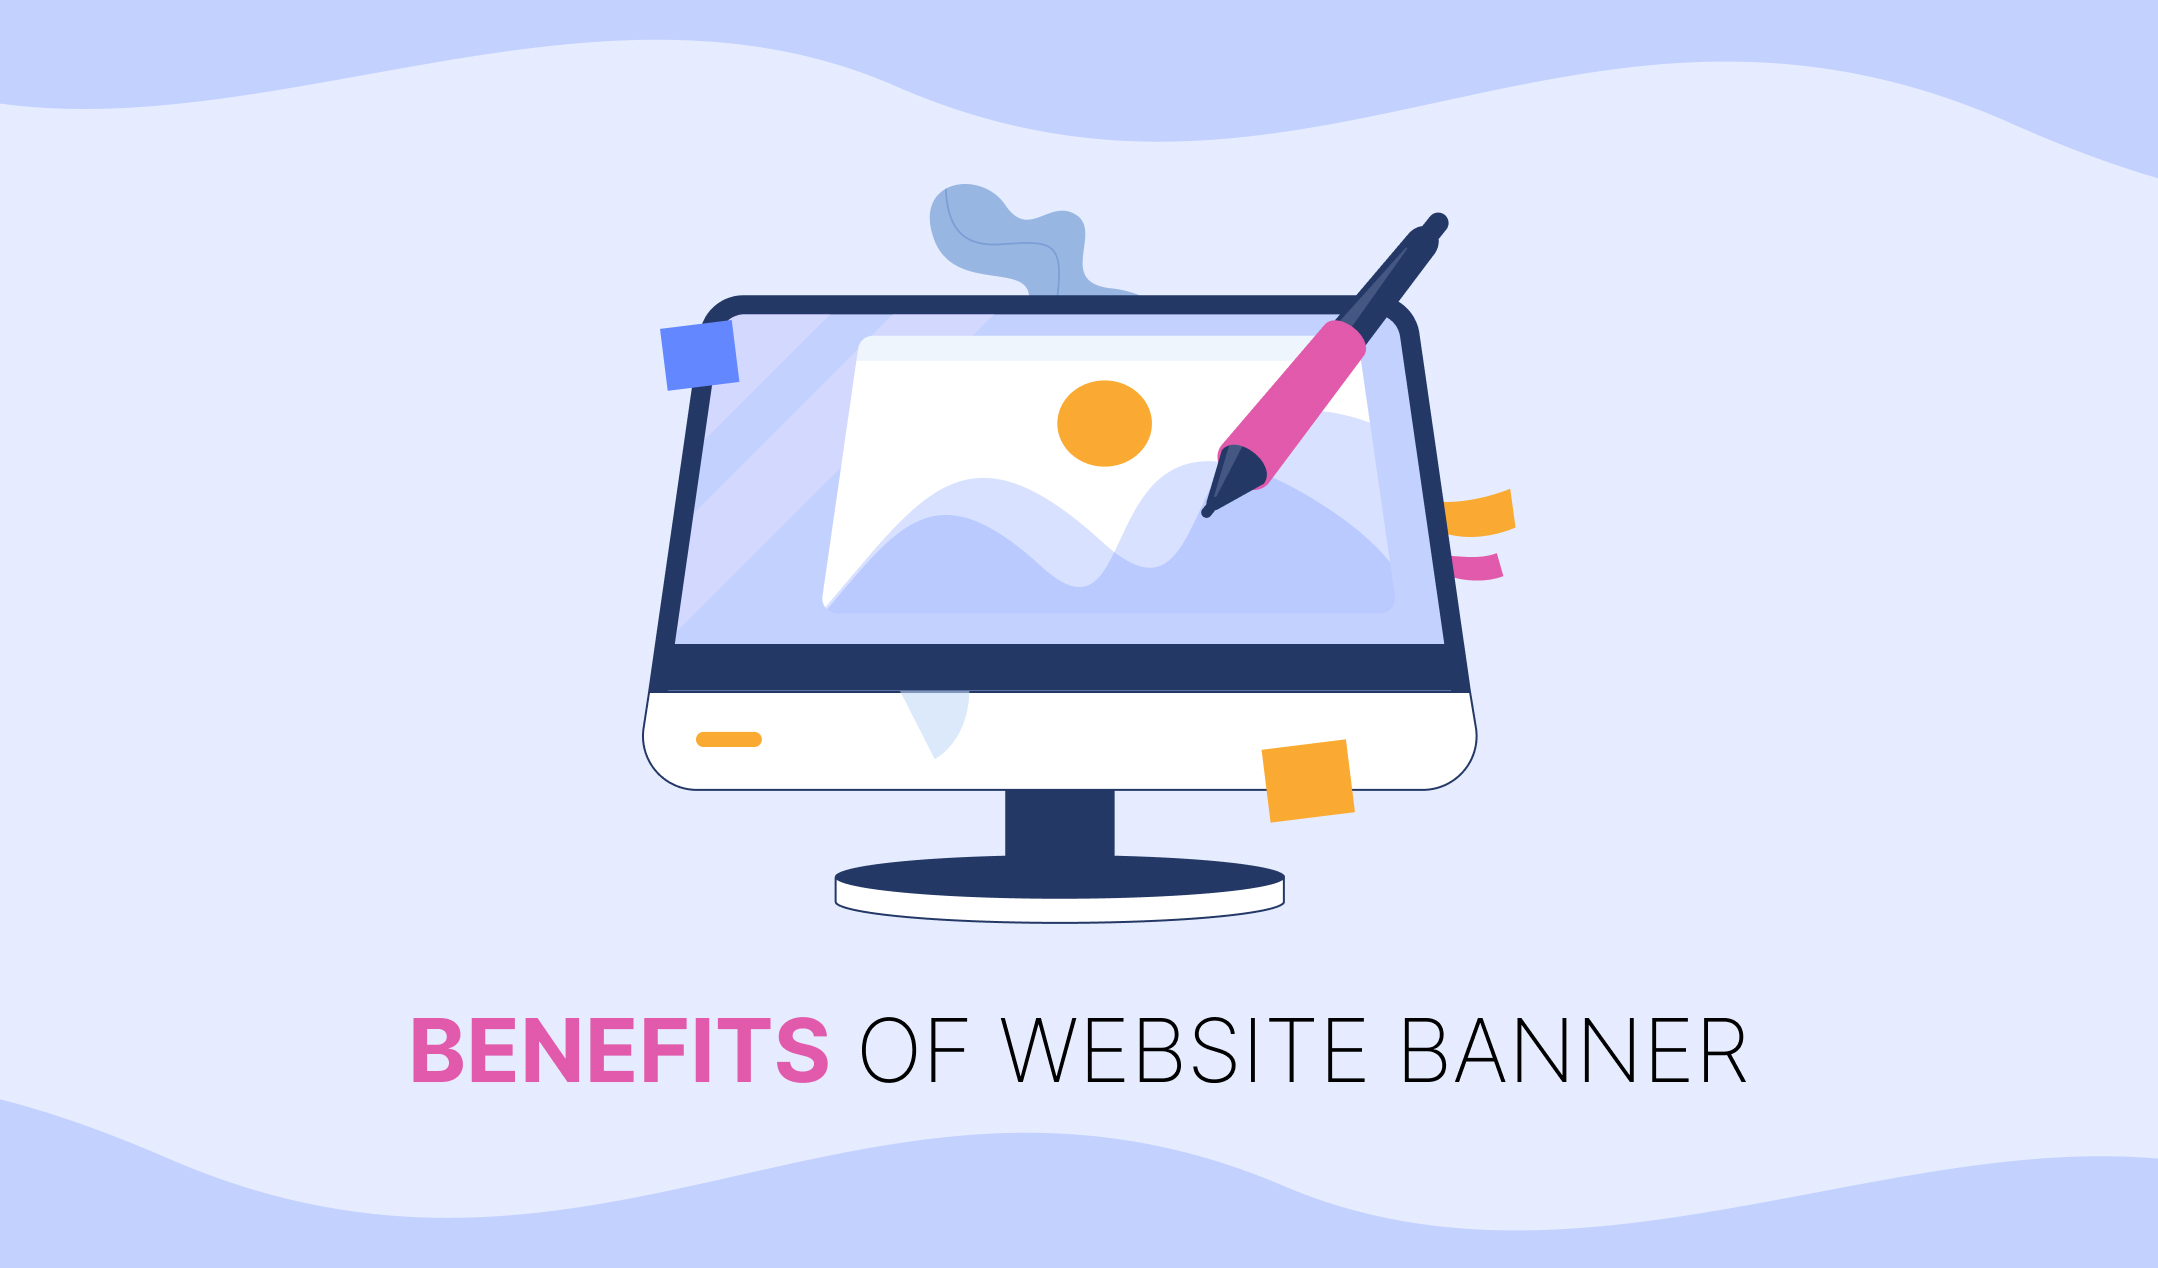 What Are The Benefits of Website Banner?